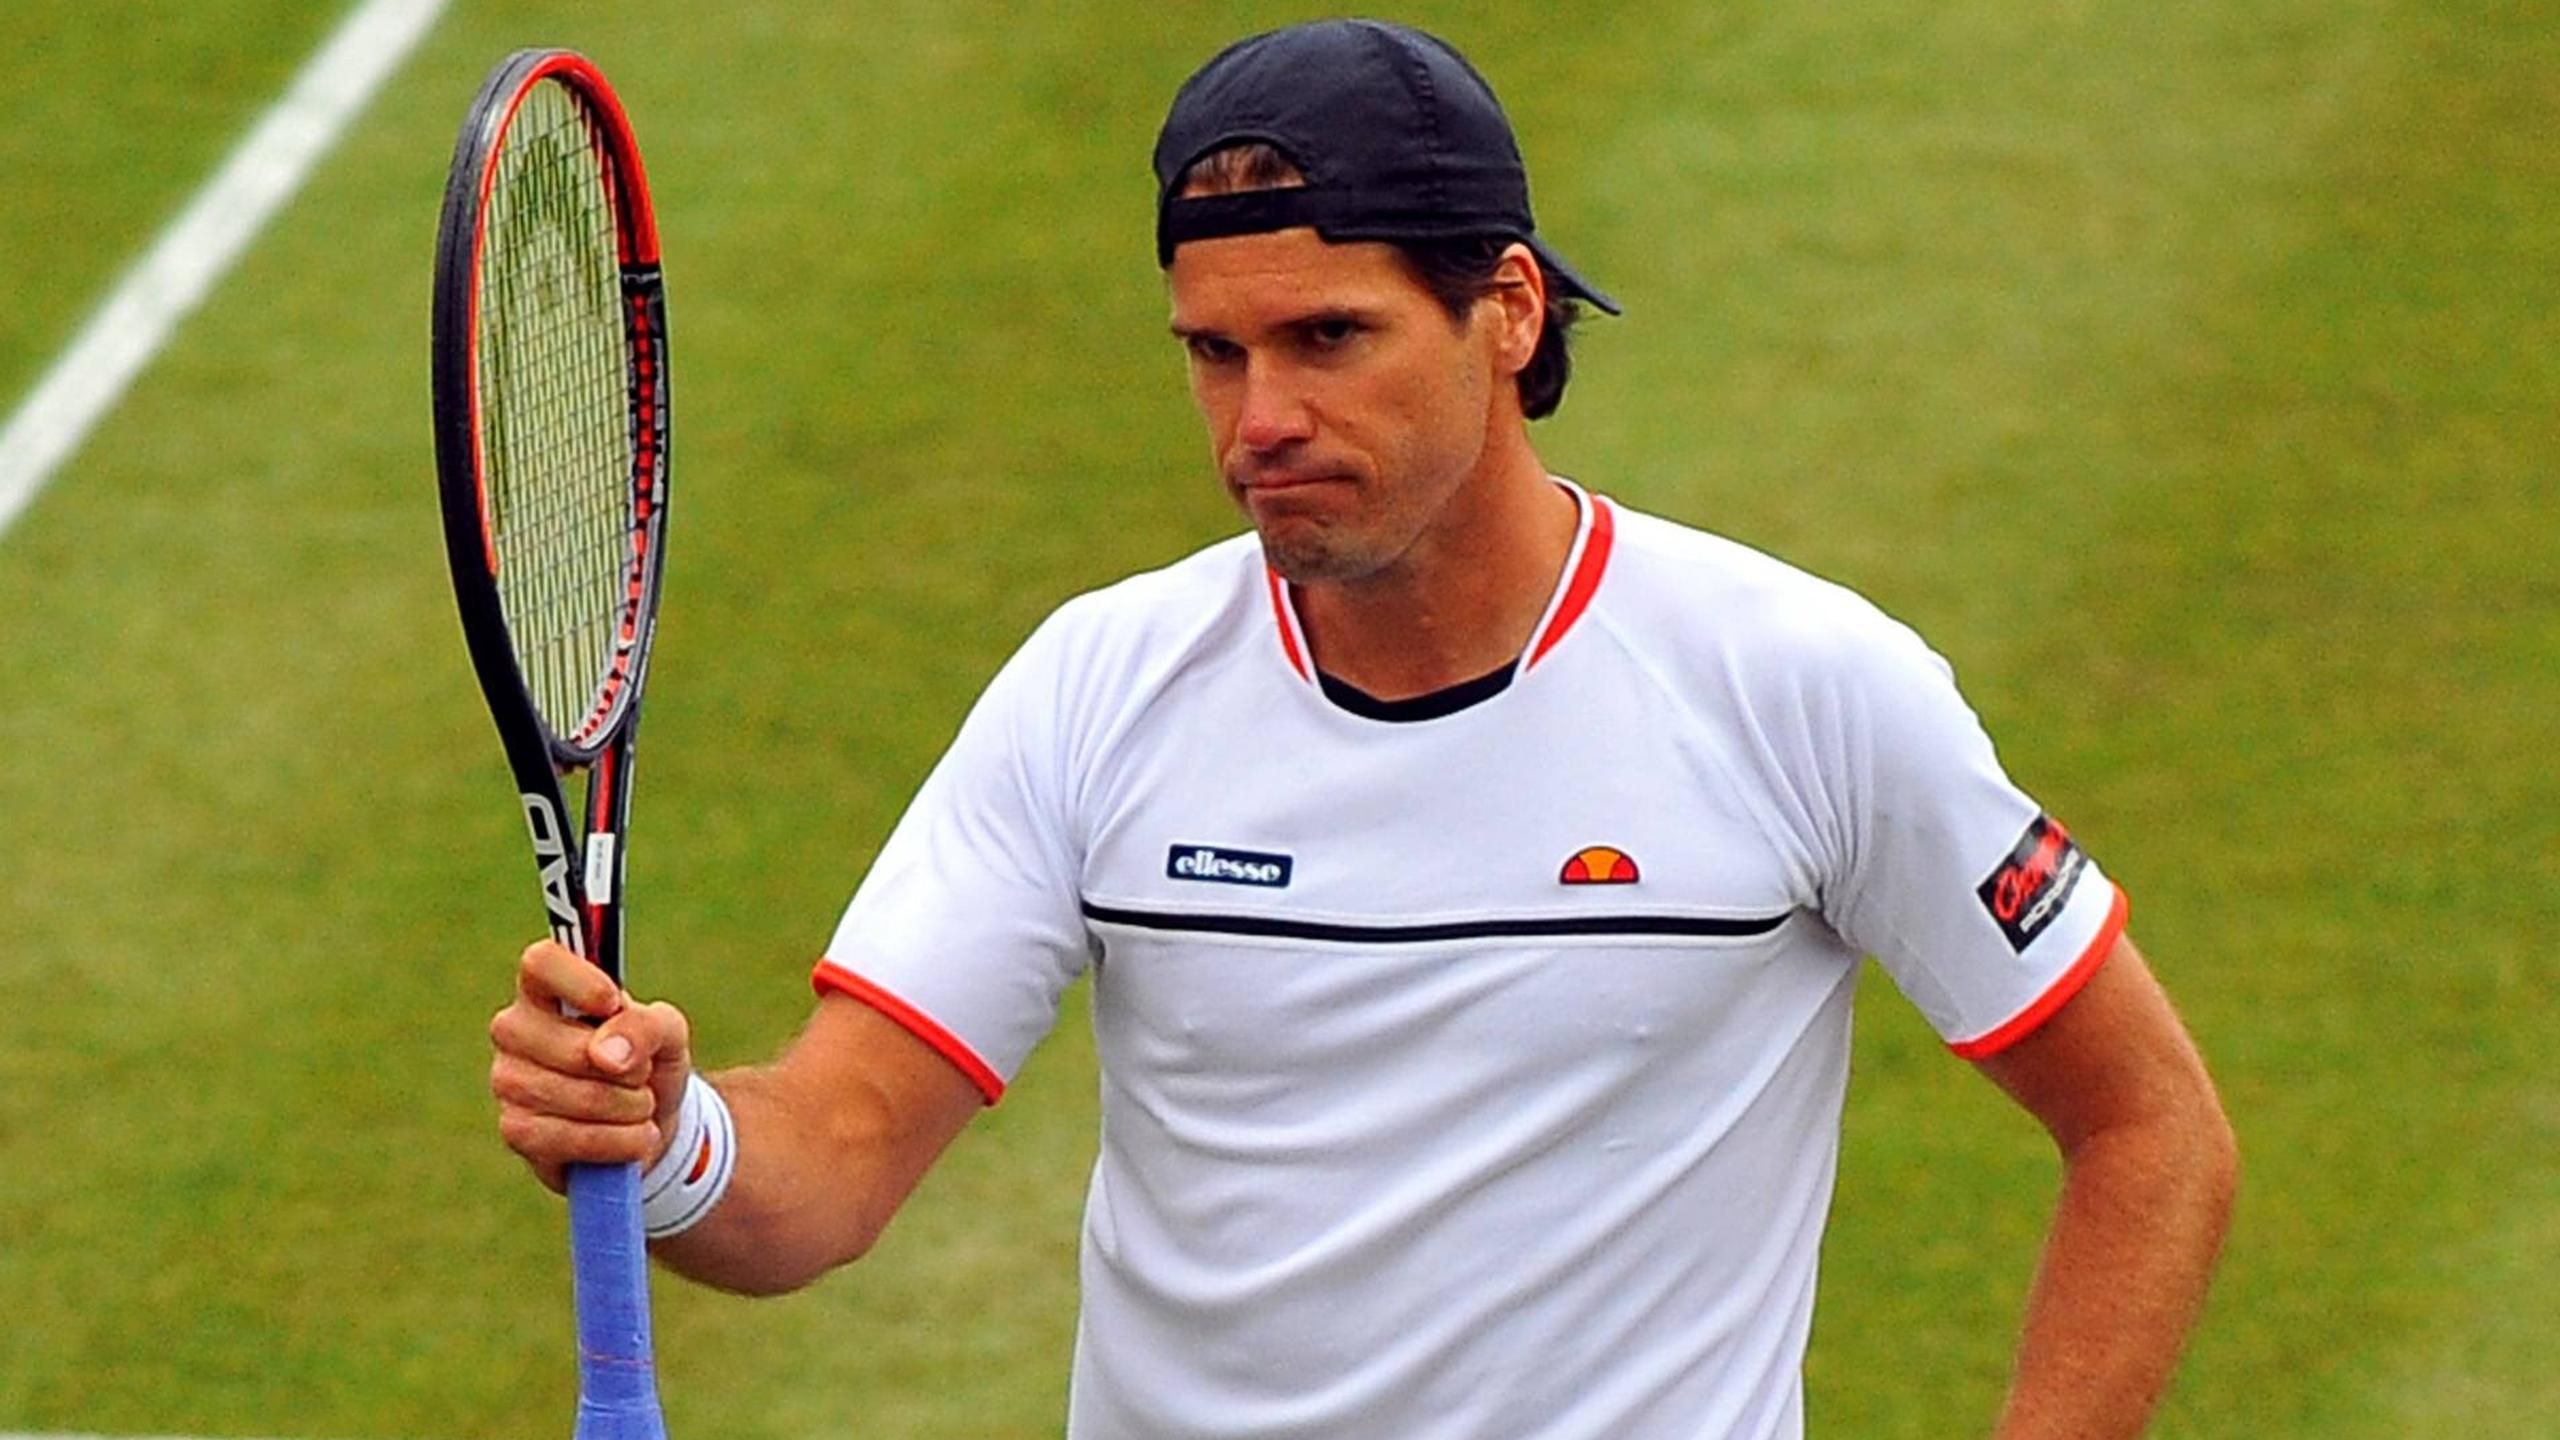 Tommy Haas after year out to complete emotional win Stuttgart -